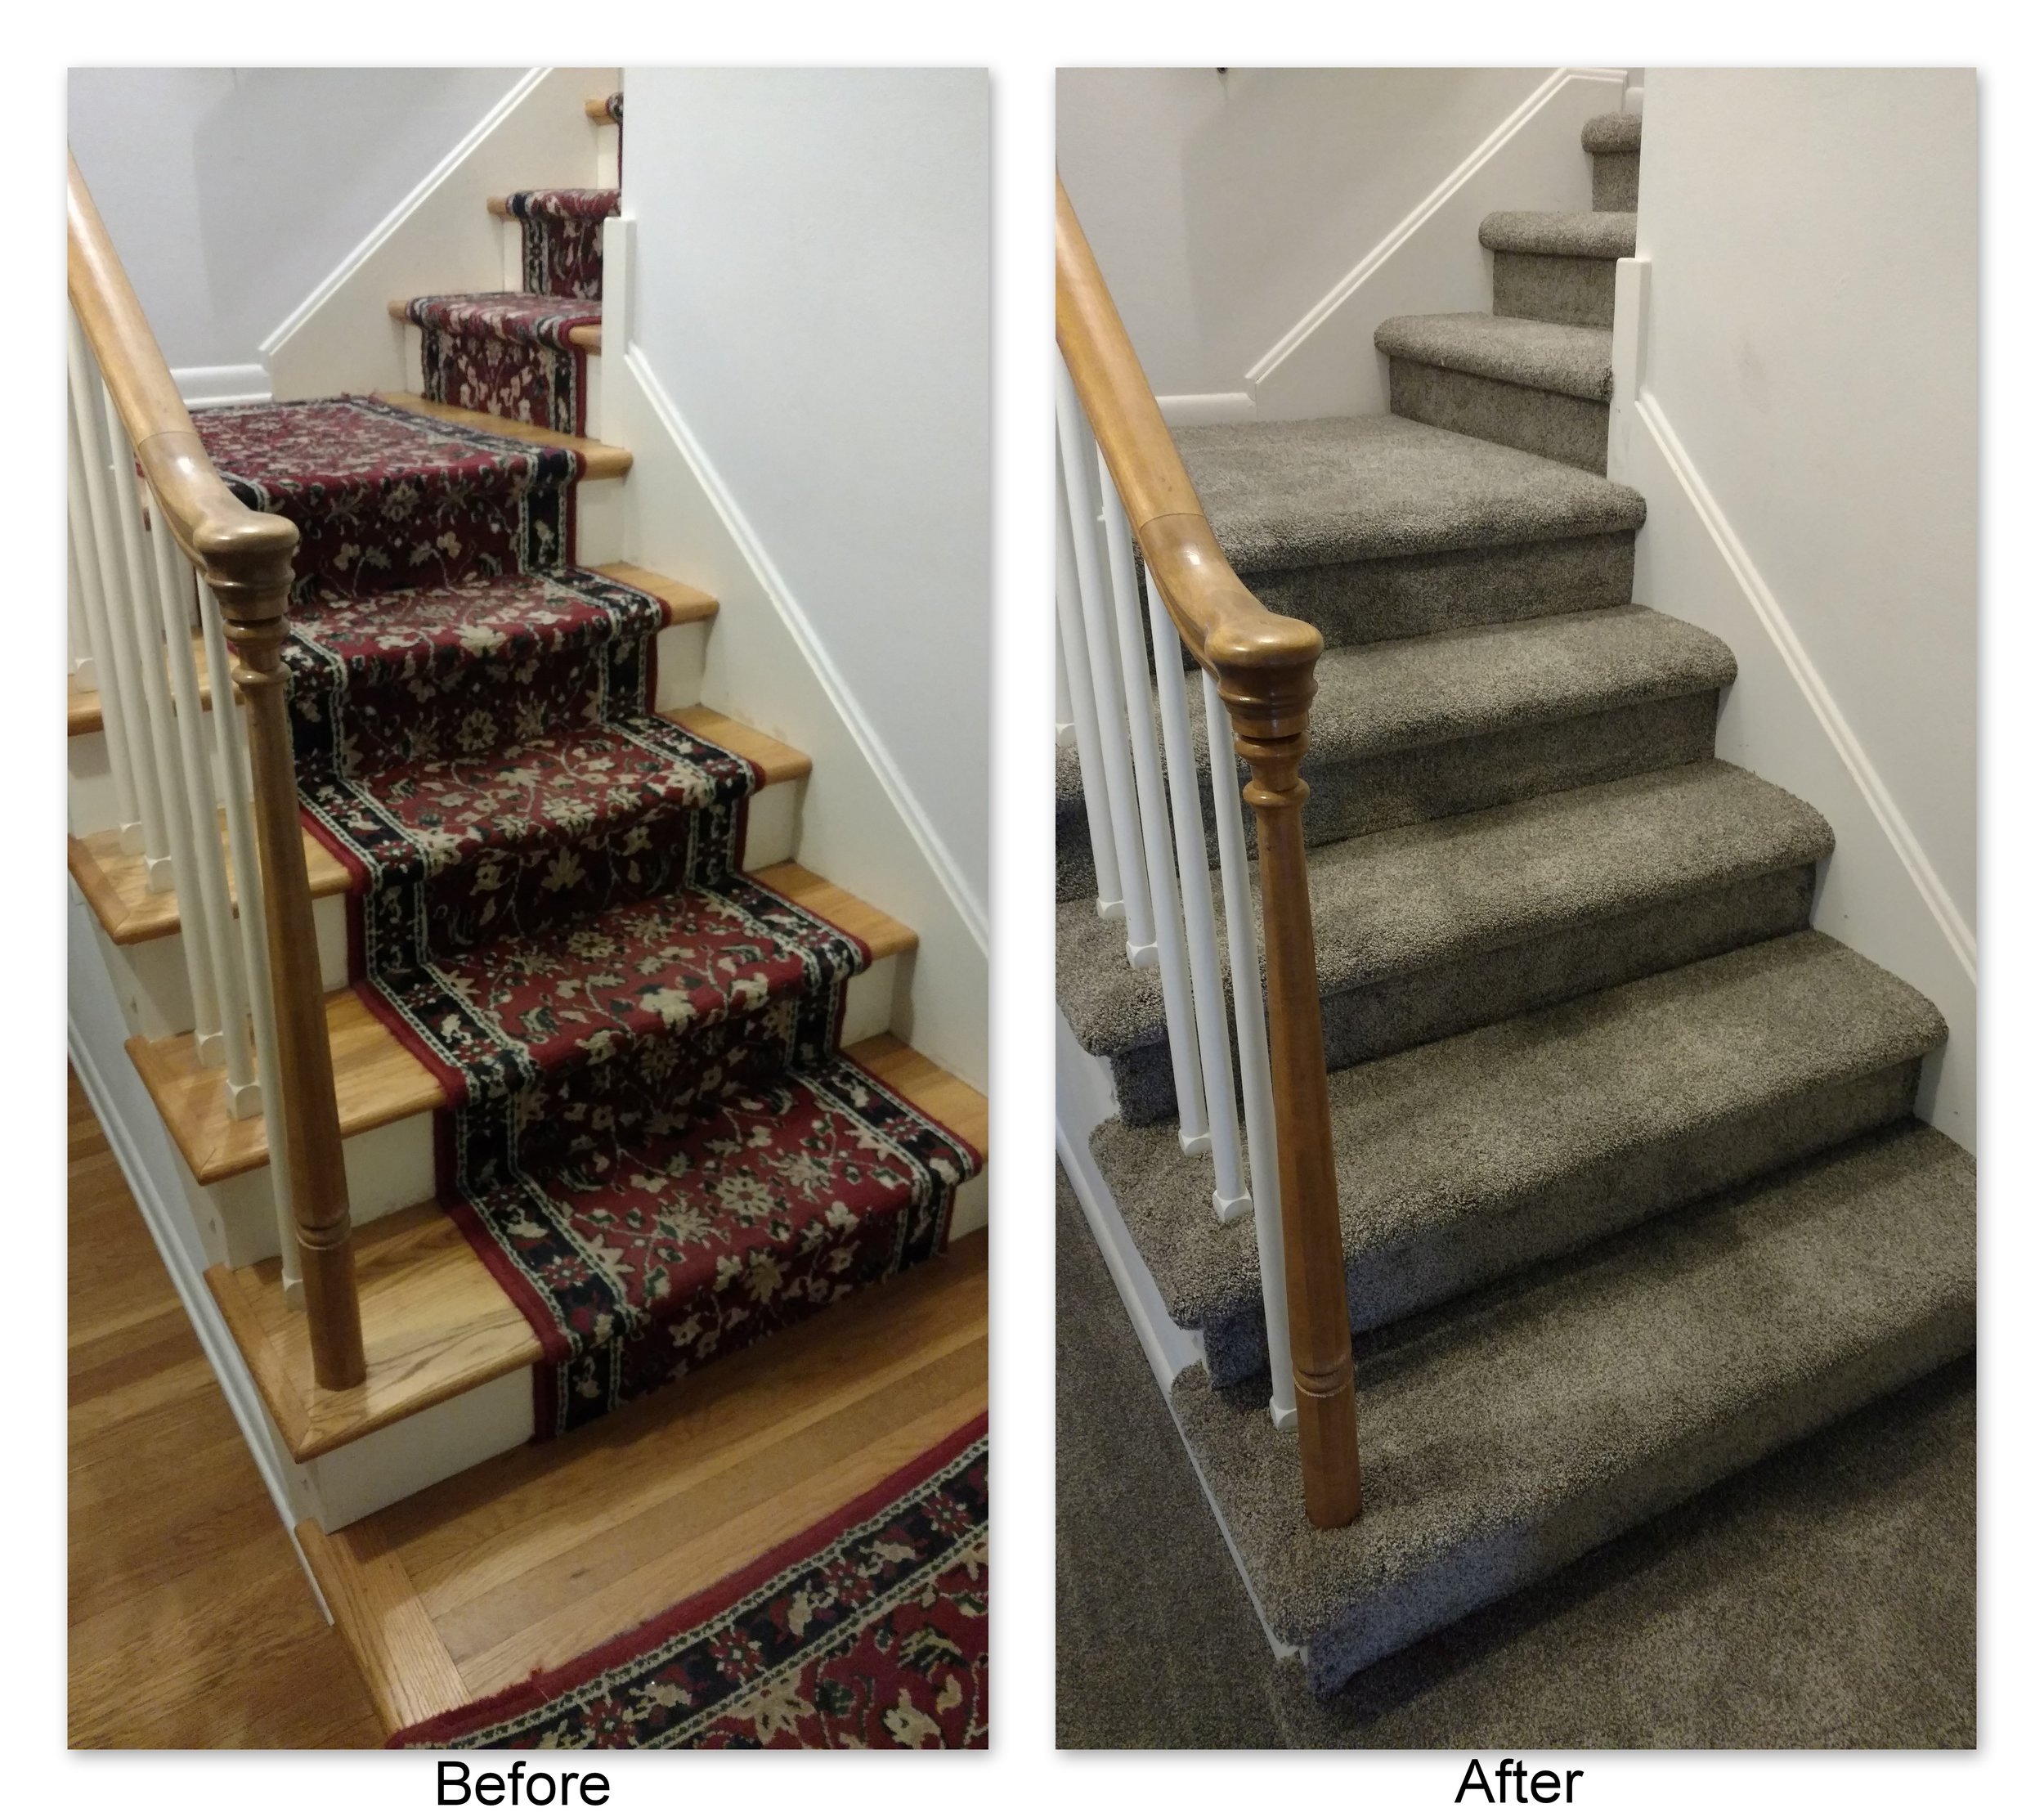 From worn old stair runner to classy grey modern multiflec, Frank &amp; Tonya's stair carpet choice of Tigressa SoftStyle Sakti Carpet in the color Sundial drastically updated their entry stairs to a contemporary style.